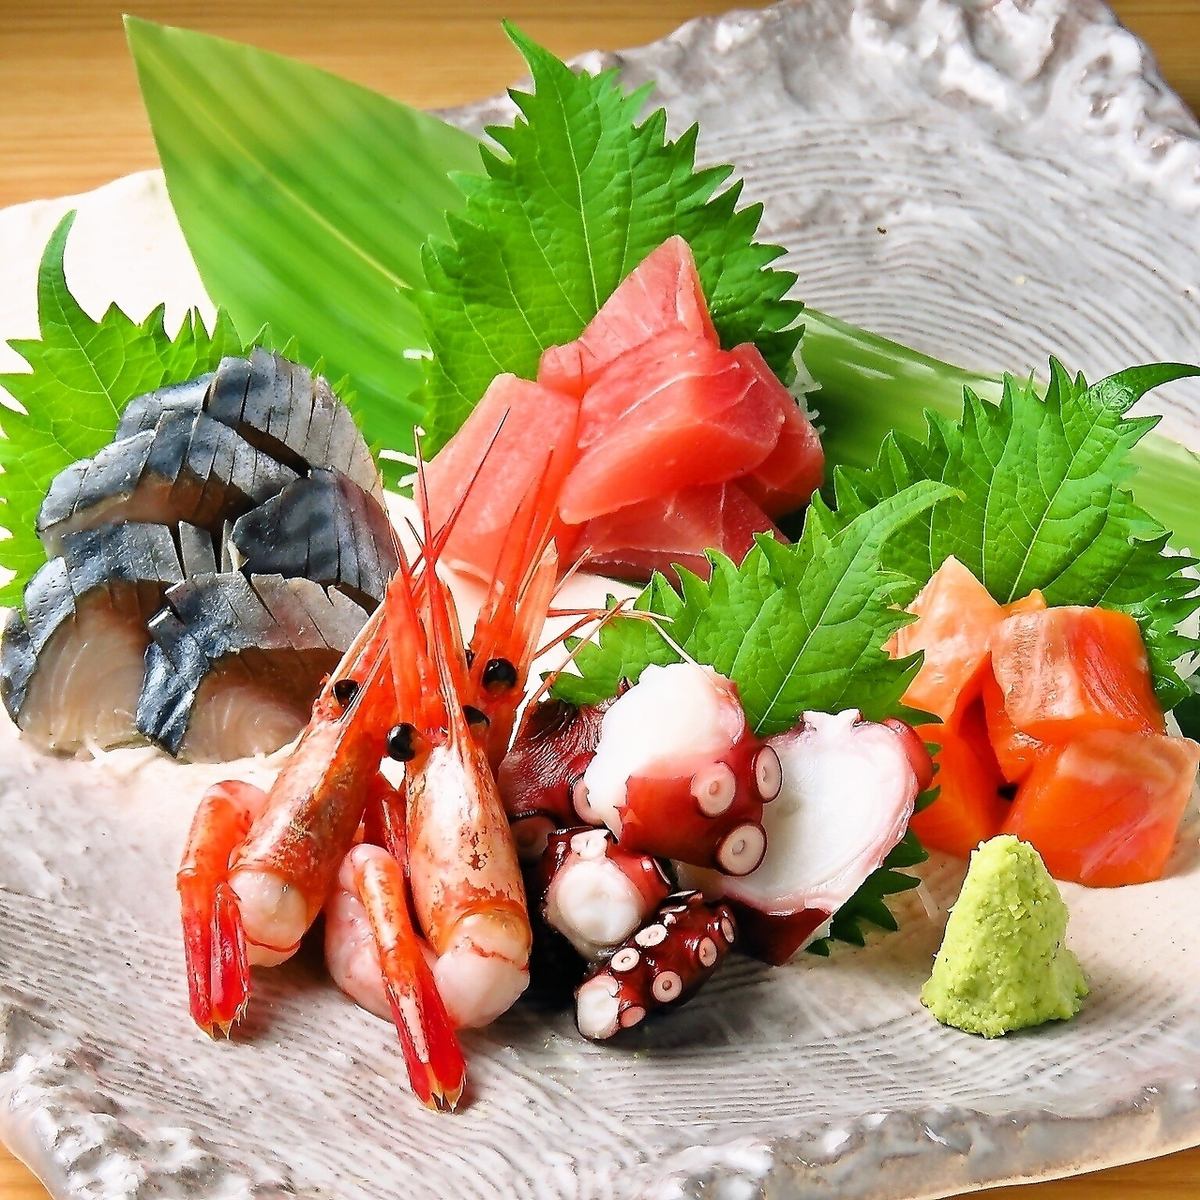 Please enjoy our specialty dishes, which are mainly made with seafood!